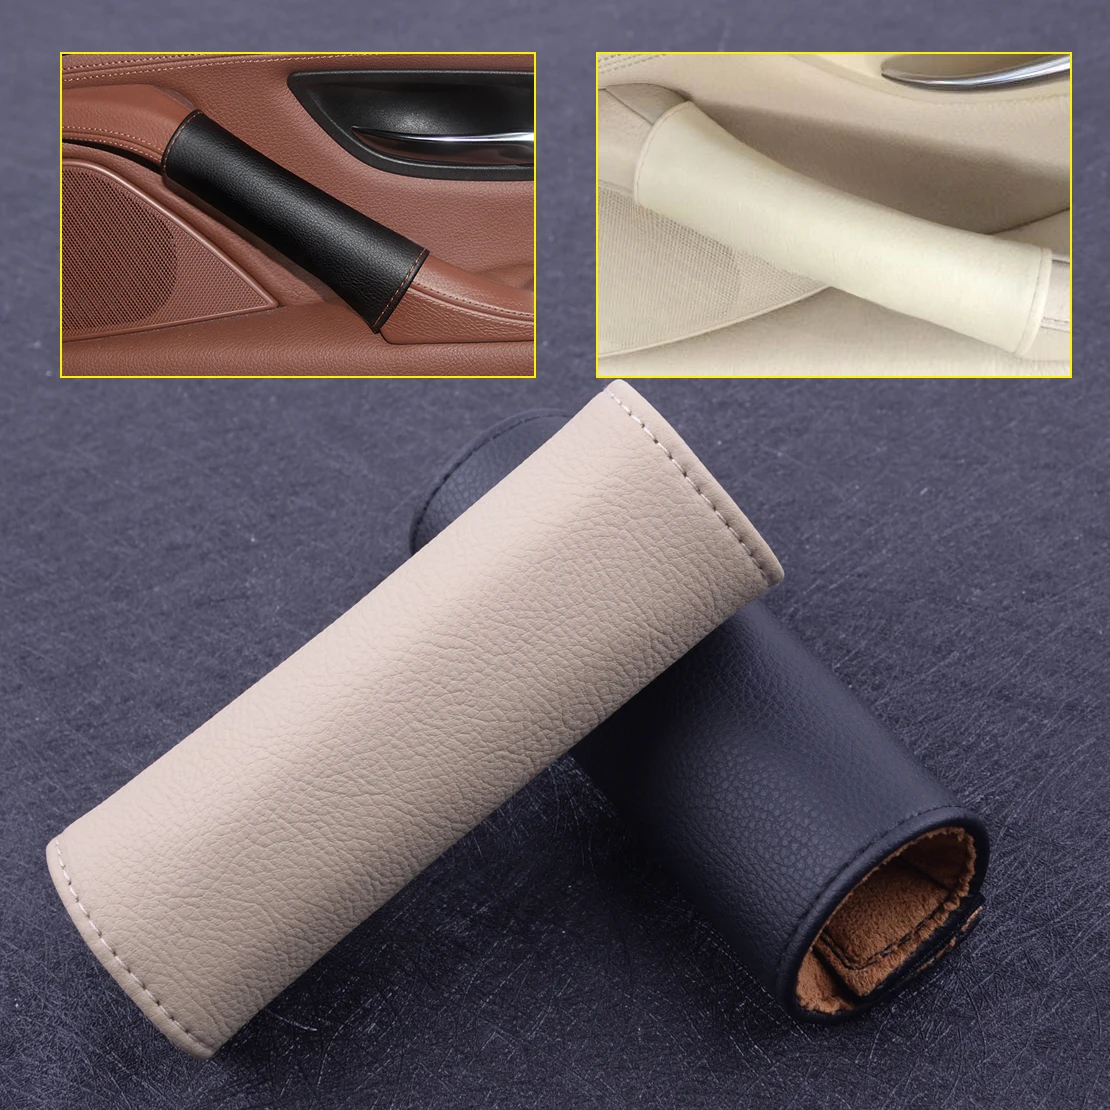 

CITALL Car Styling Interior Leather Door Panel Pull Handle Trim Cover Sleeve Protector Fit For BMW 5 Series F10